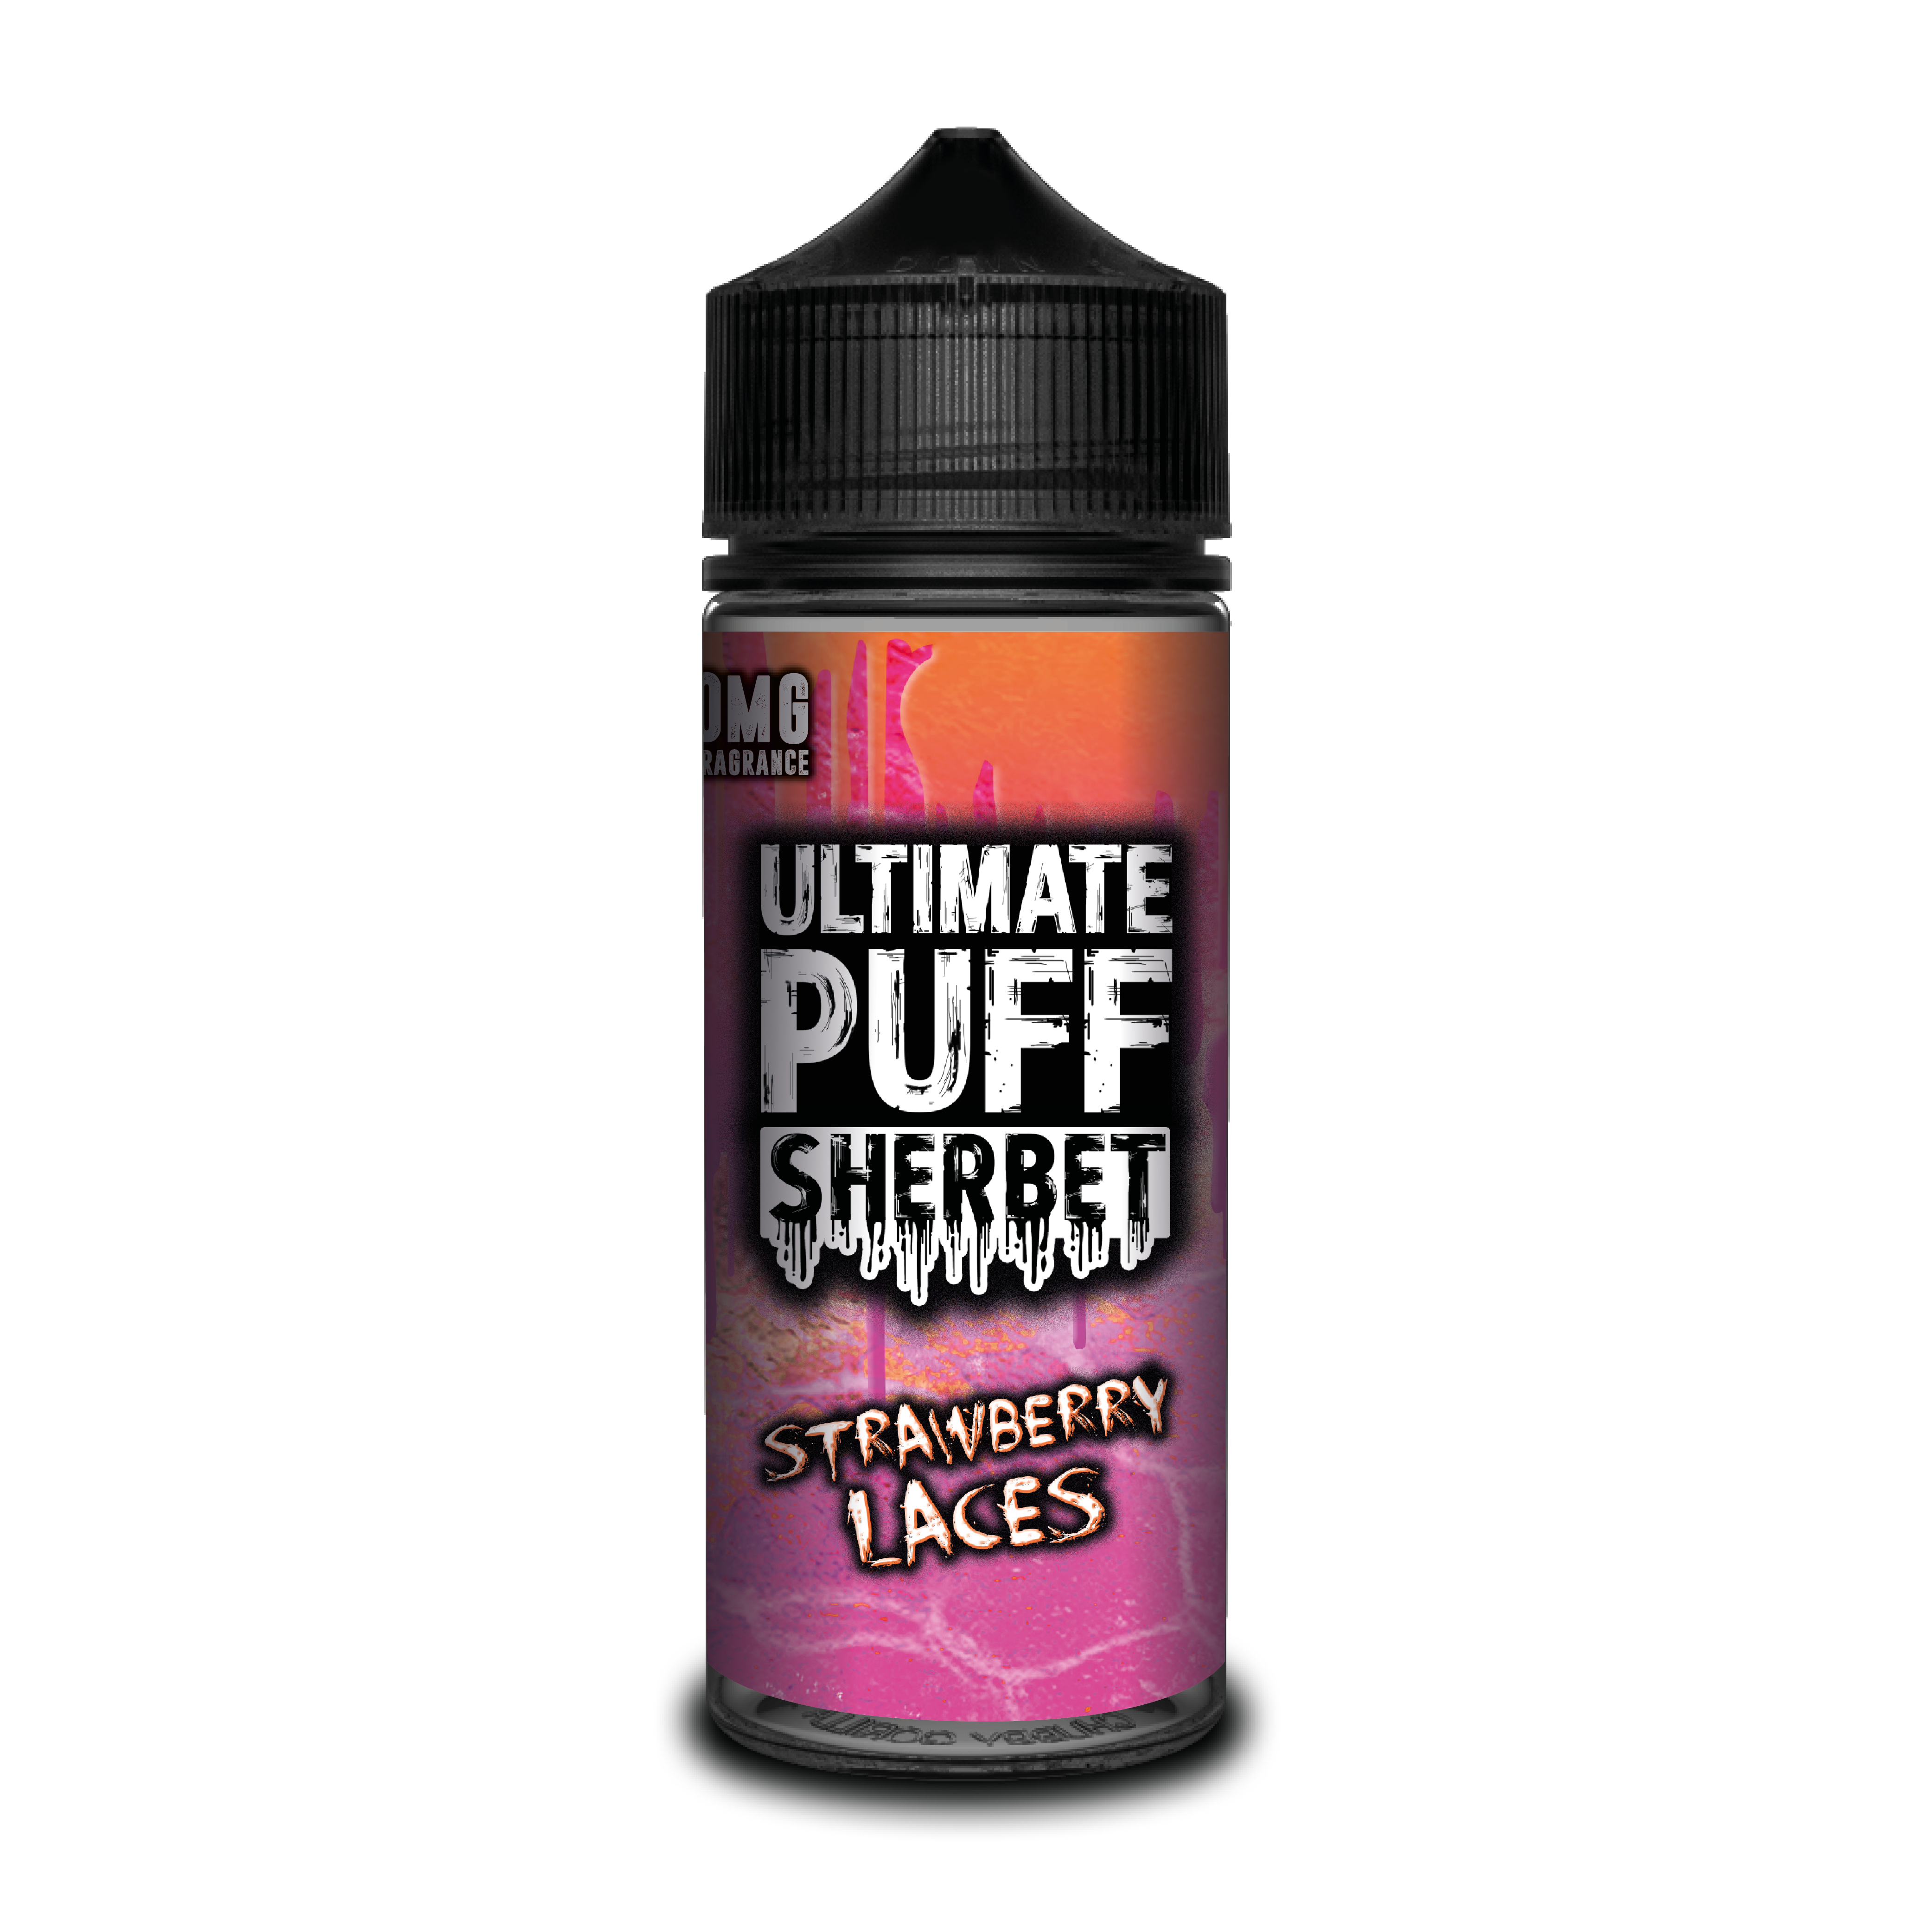 Strawberry Laces Sherbet Shortfill by Ultimate Puff